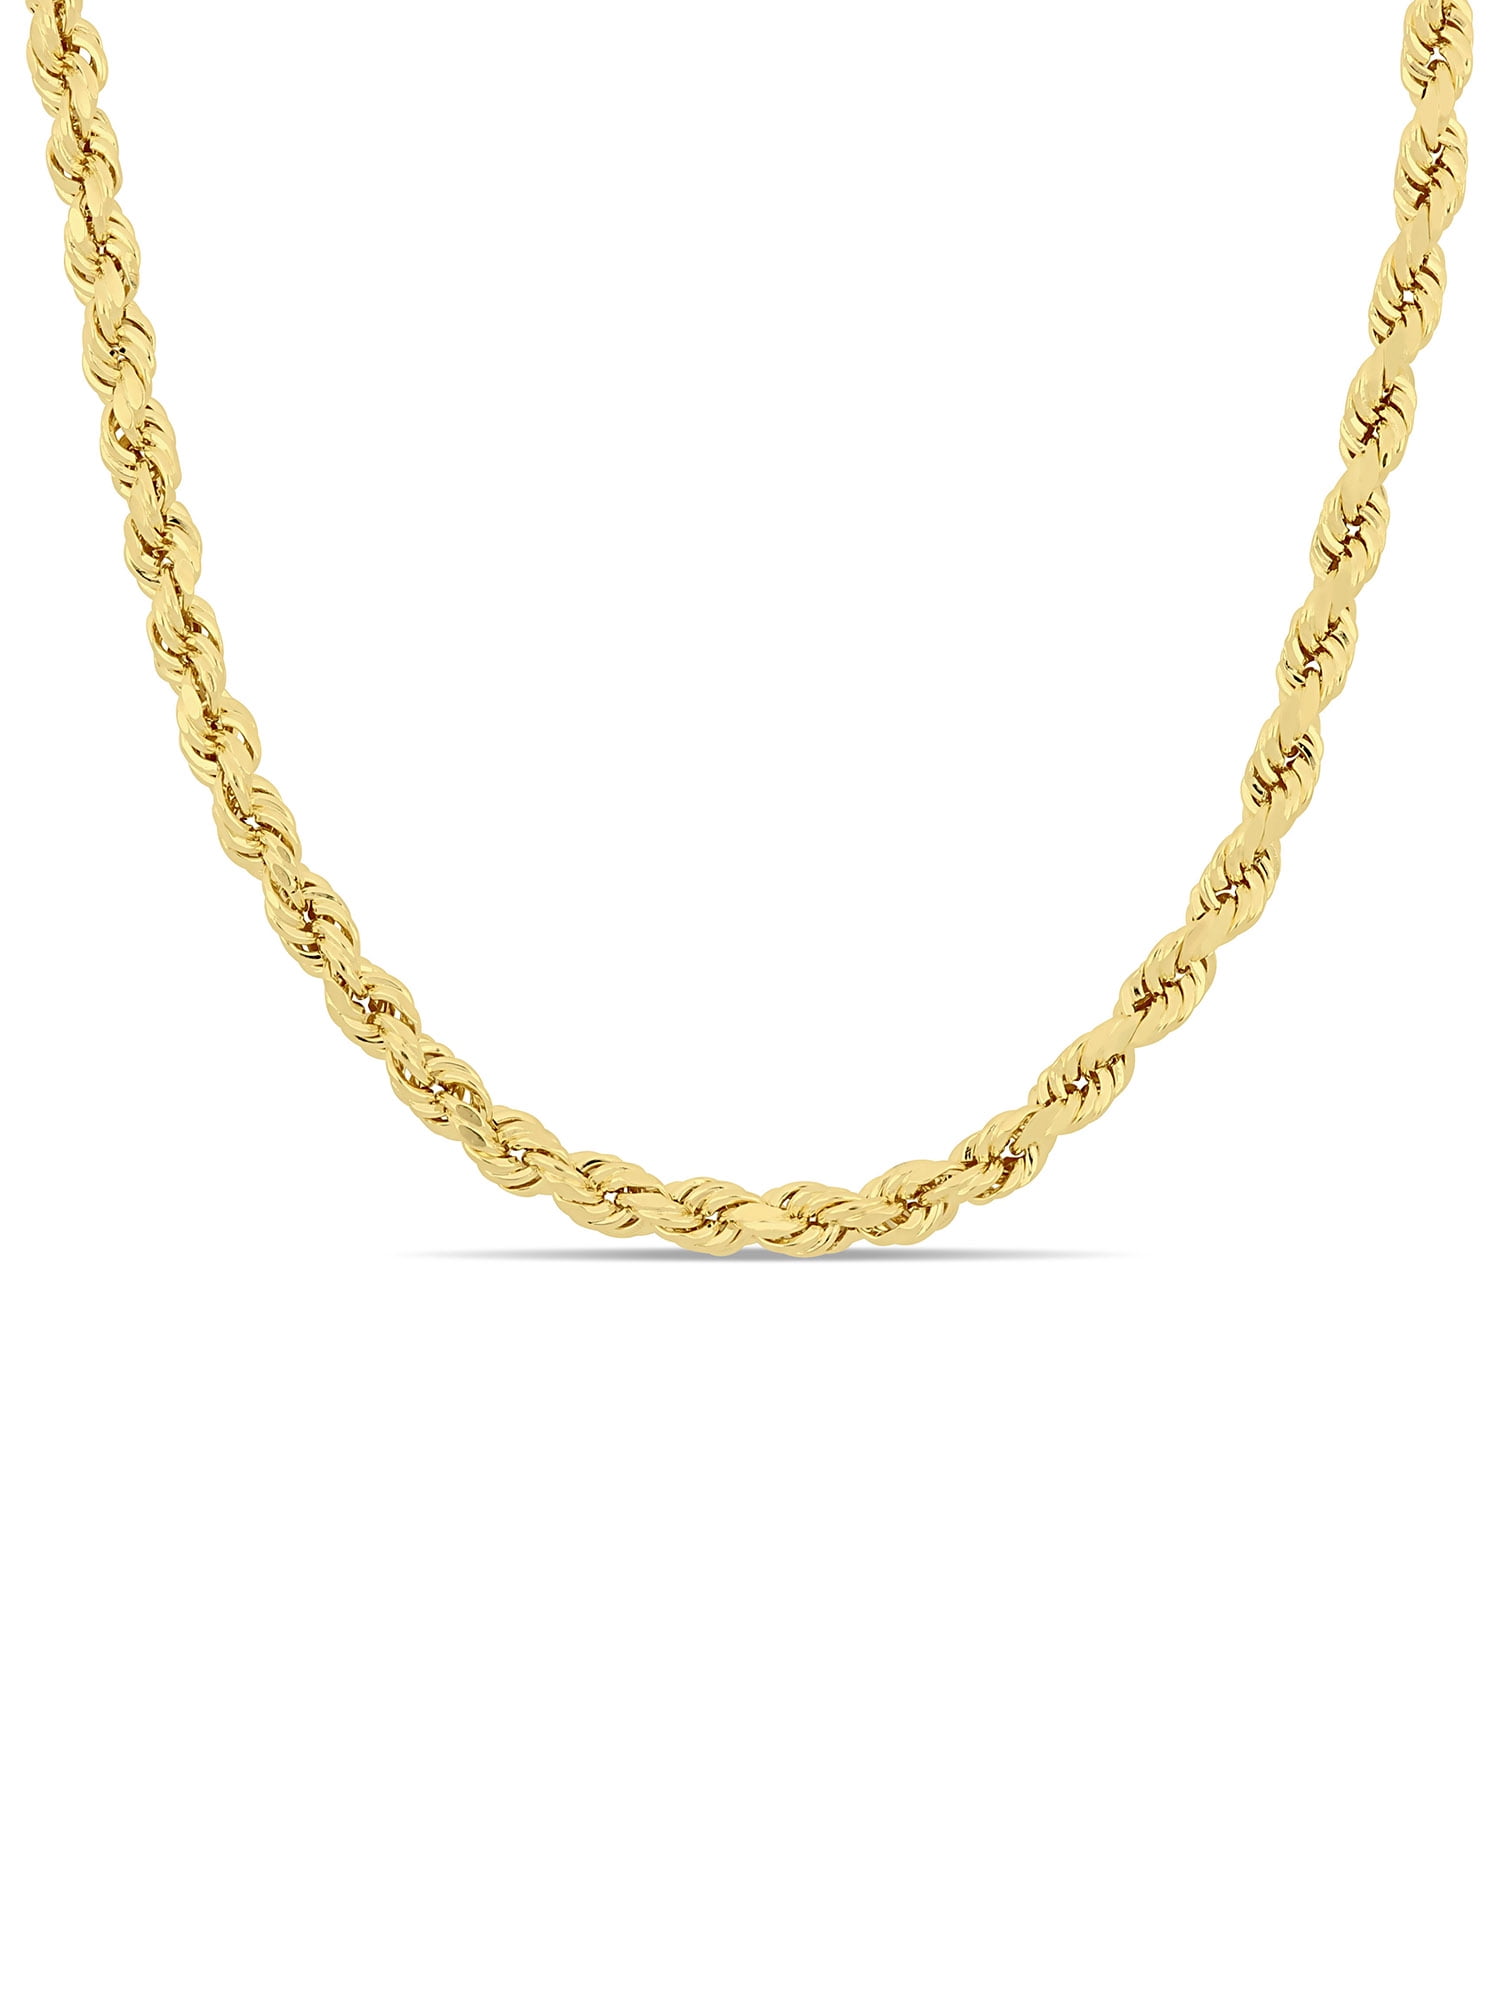 Kooljewelry Solid 14k Yellow Gold Filled Rope Chain Necklace (2.1 mm, 16  inch)